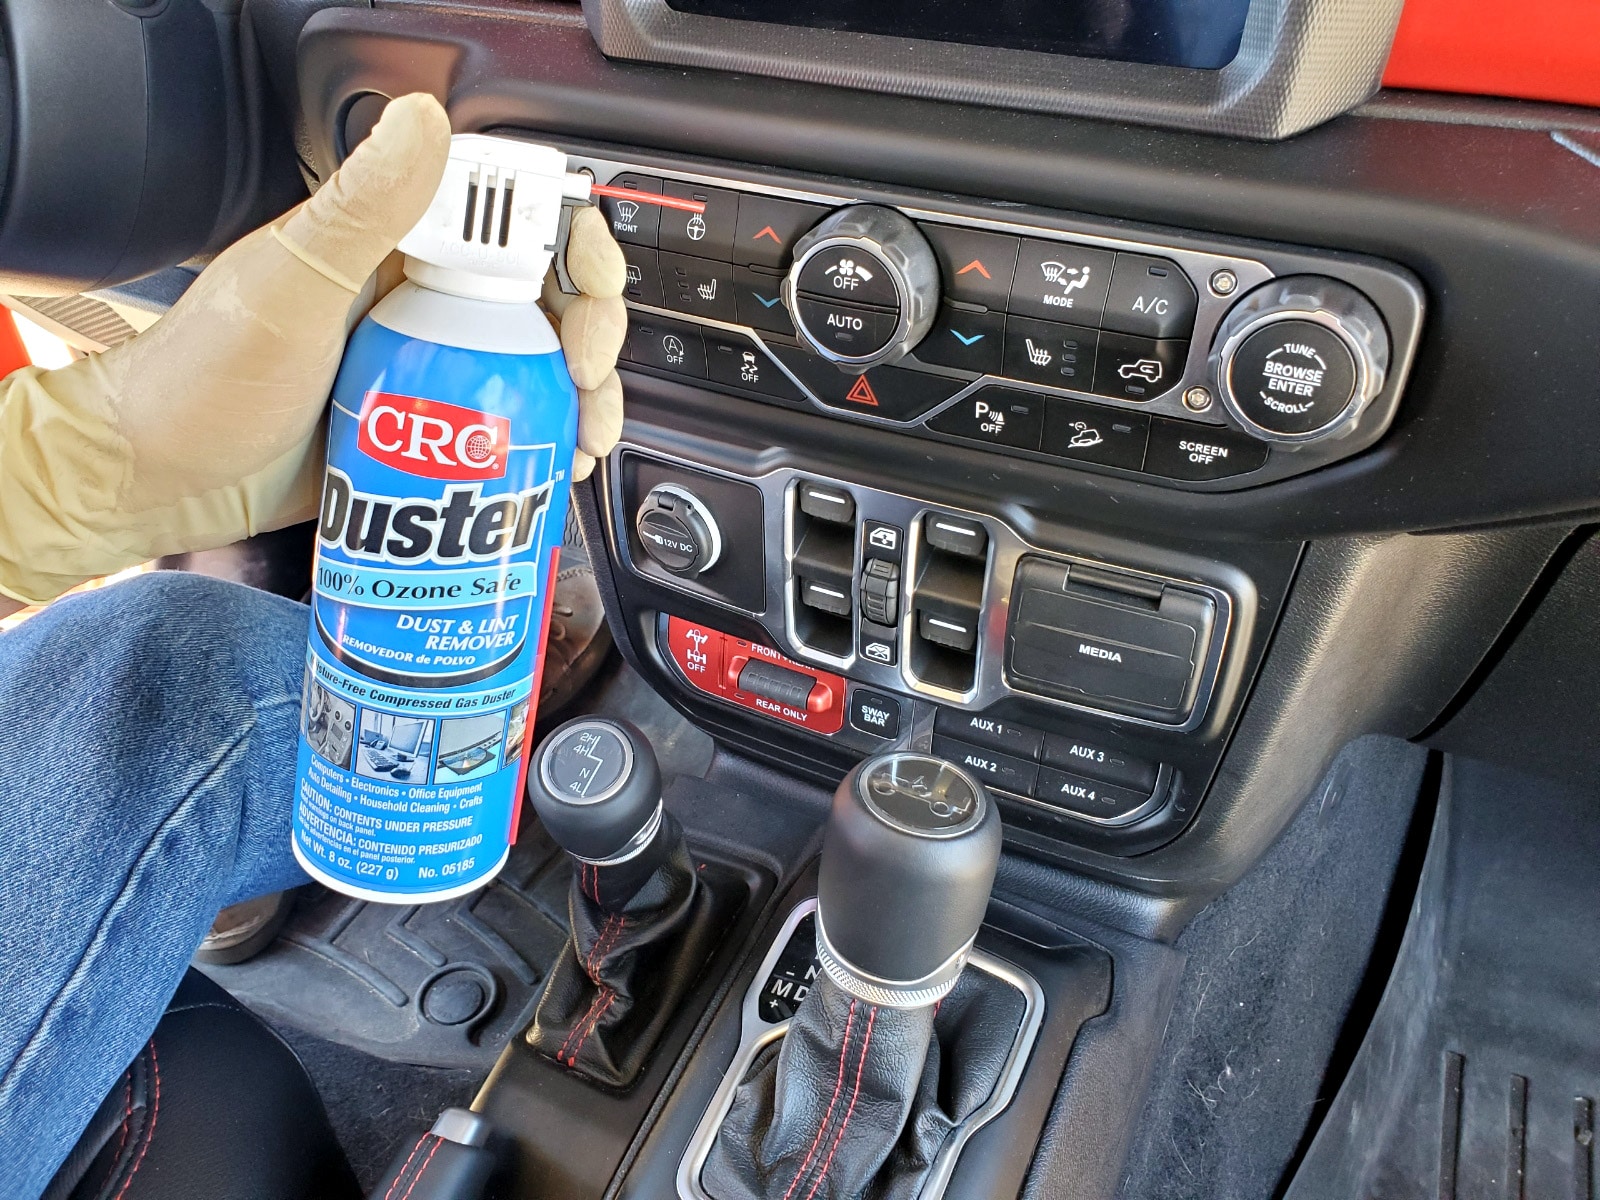 CRC Duster Moisture-Free Dust & Lint Remover - 8 oz, Powerful Blast, Safe  for Sensitive Components